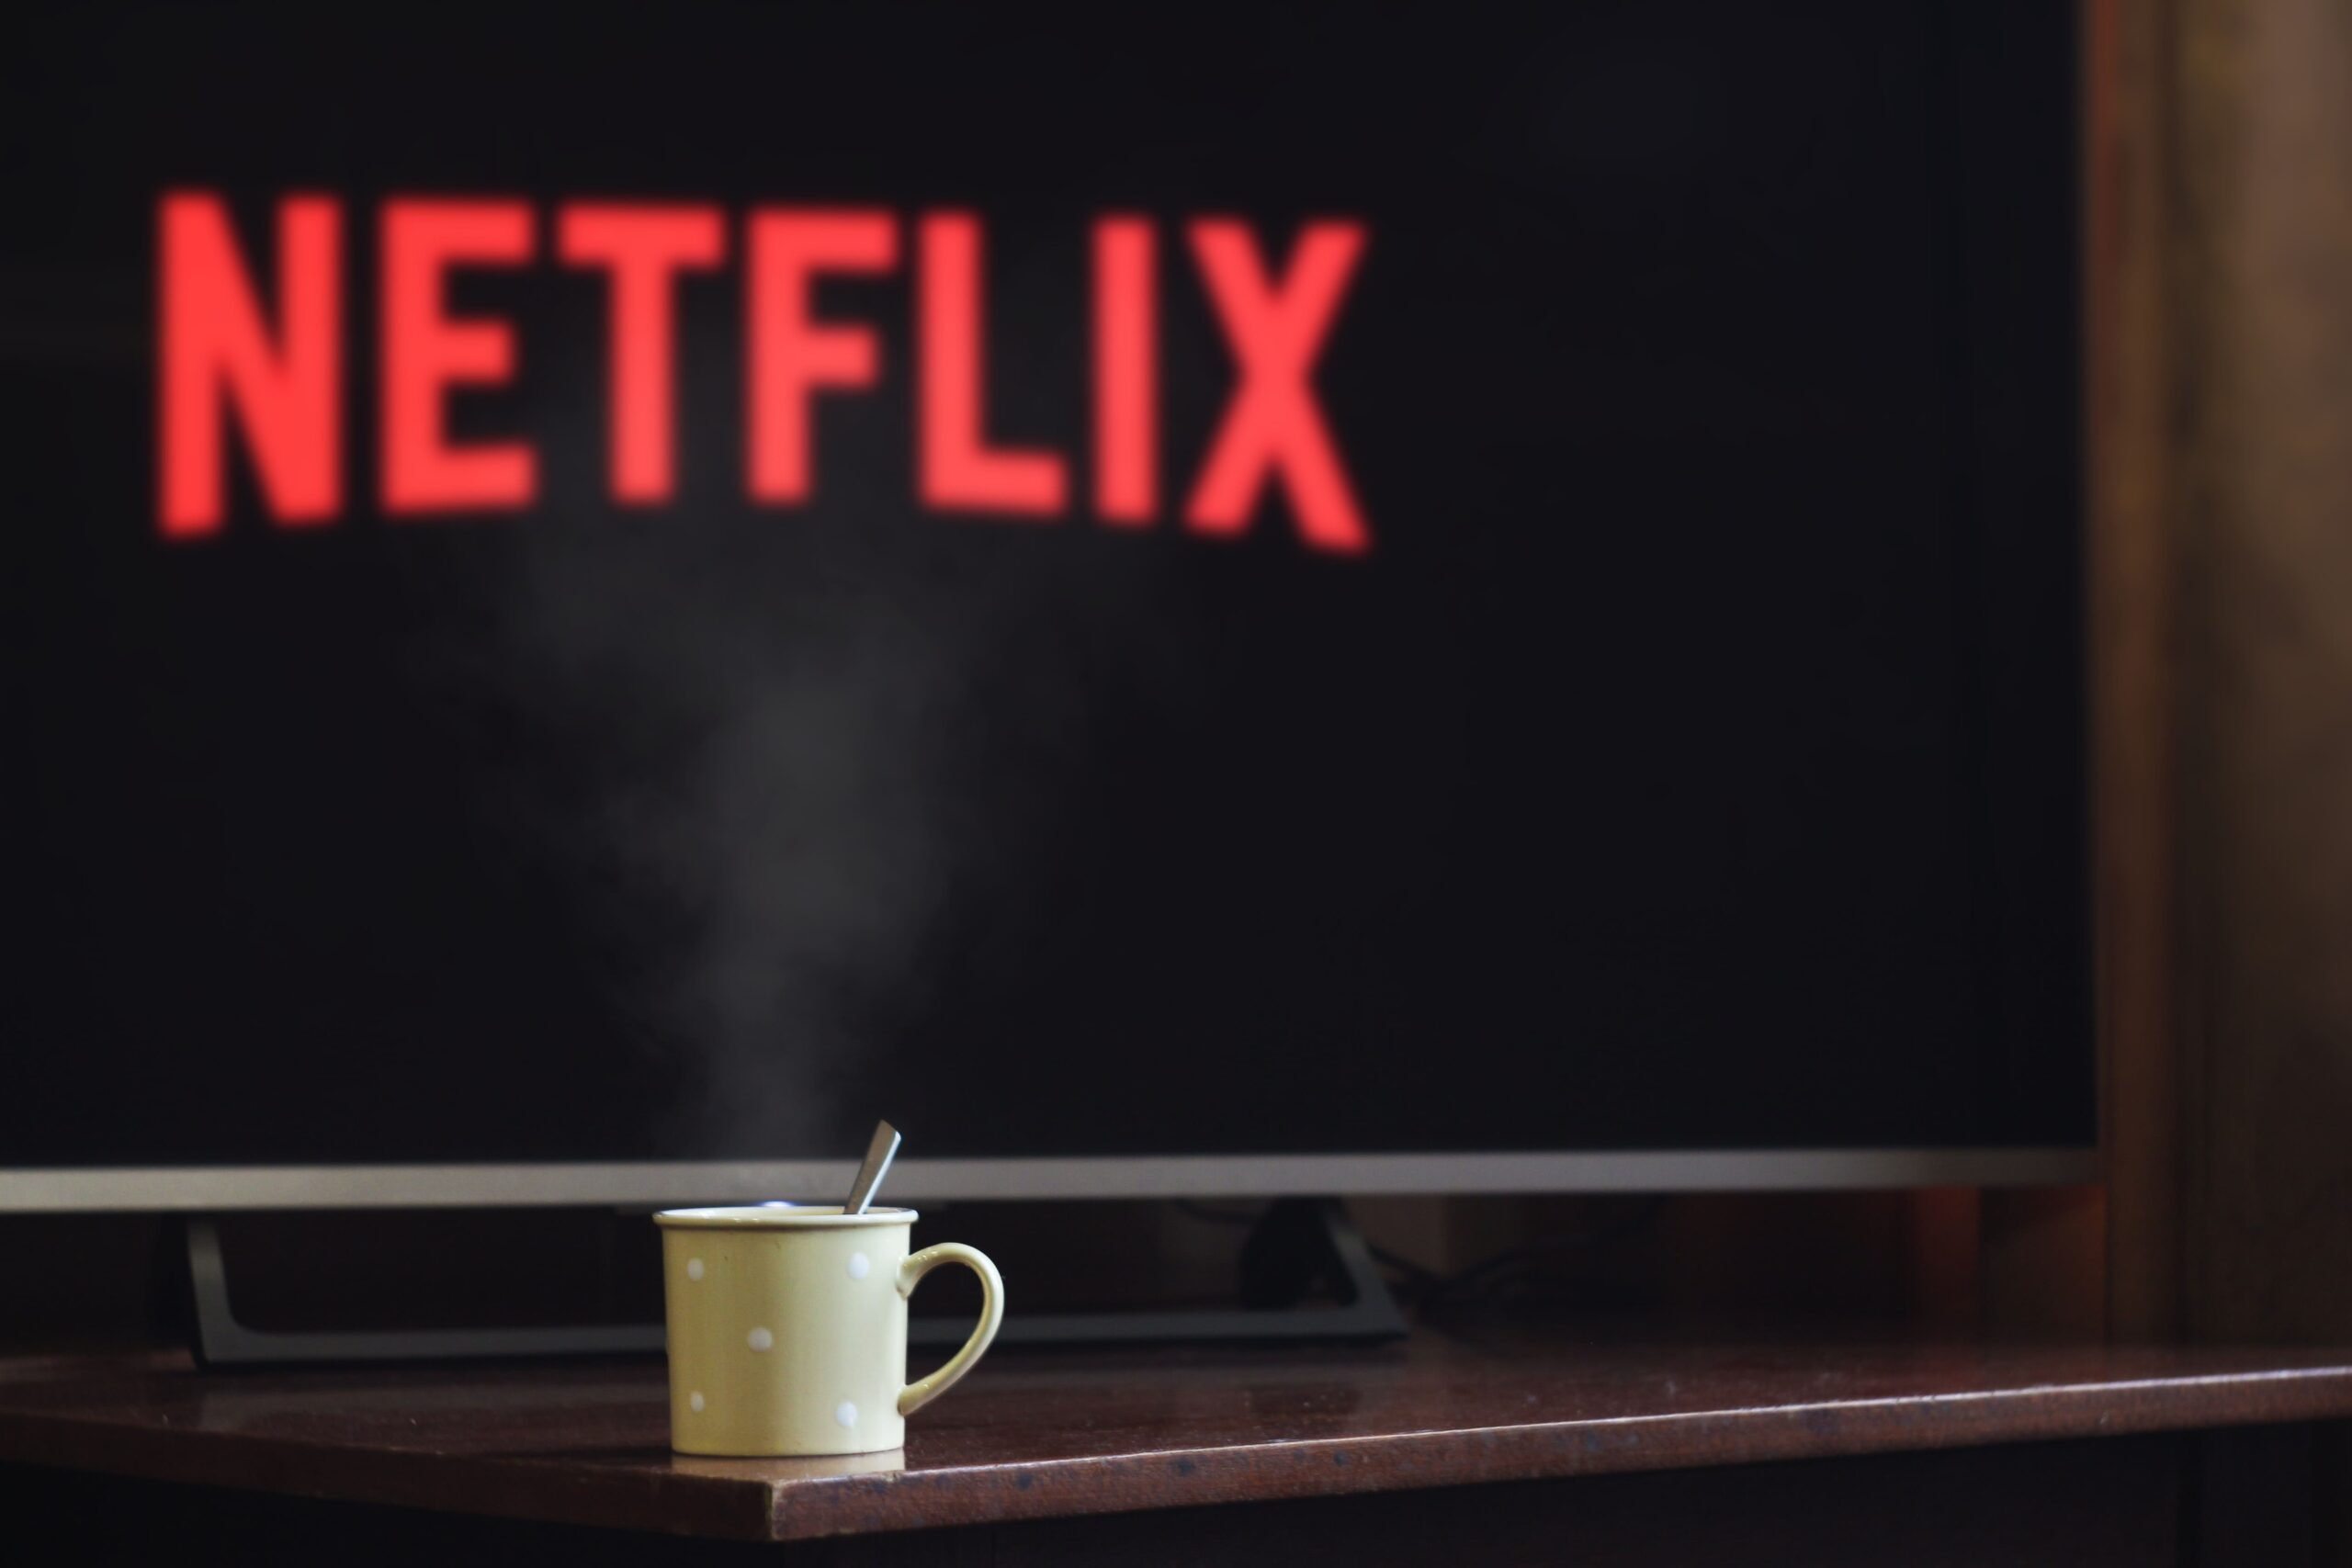 Netflix loading screen on television with a cup of coffee in front.